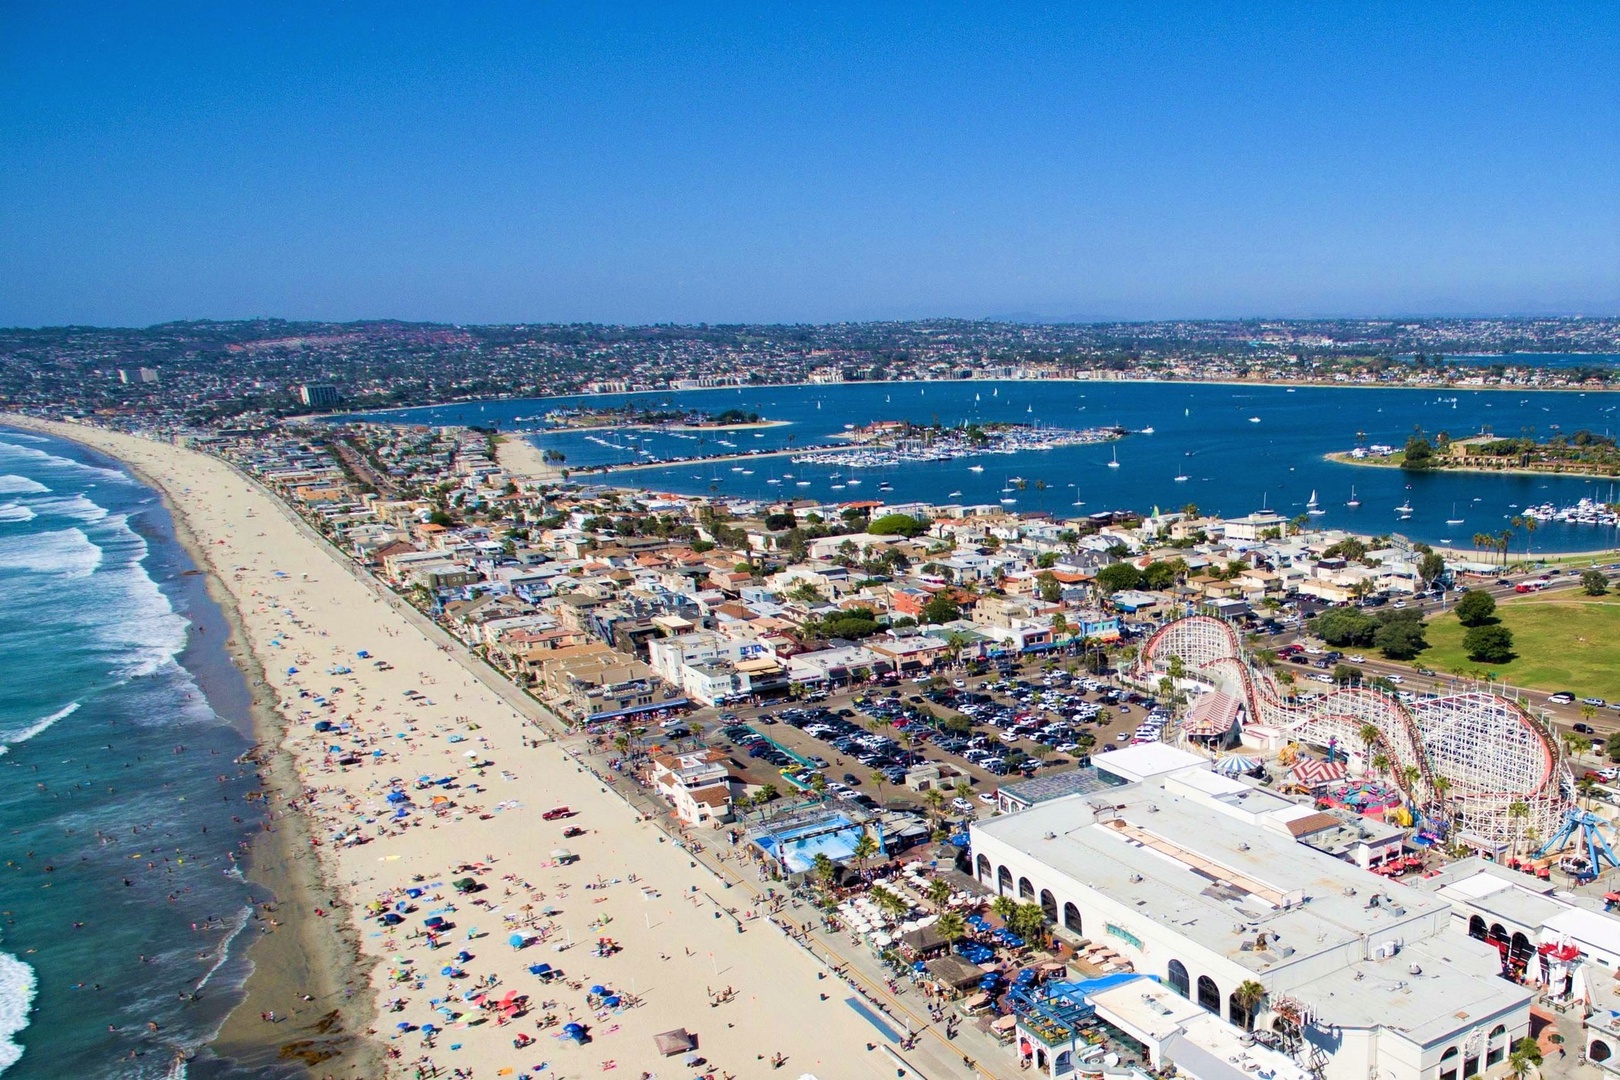 Overview of Mission Beach